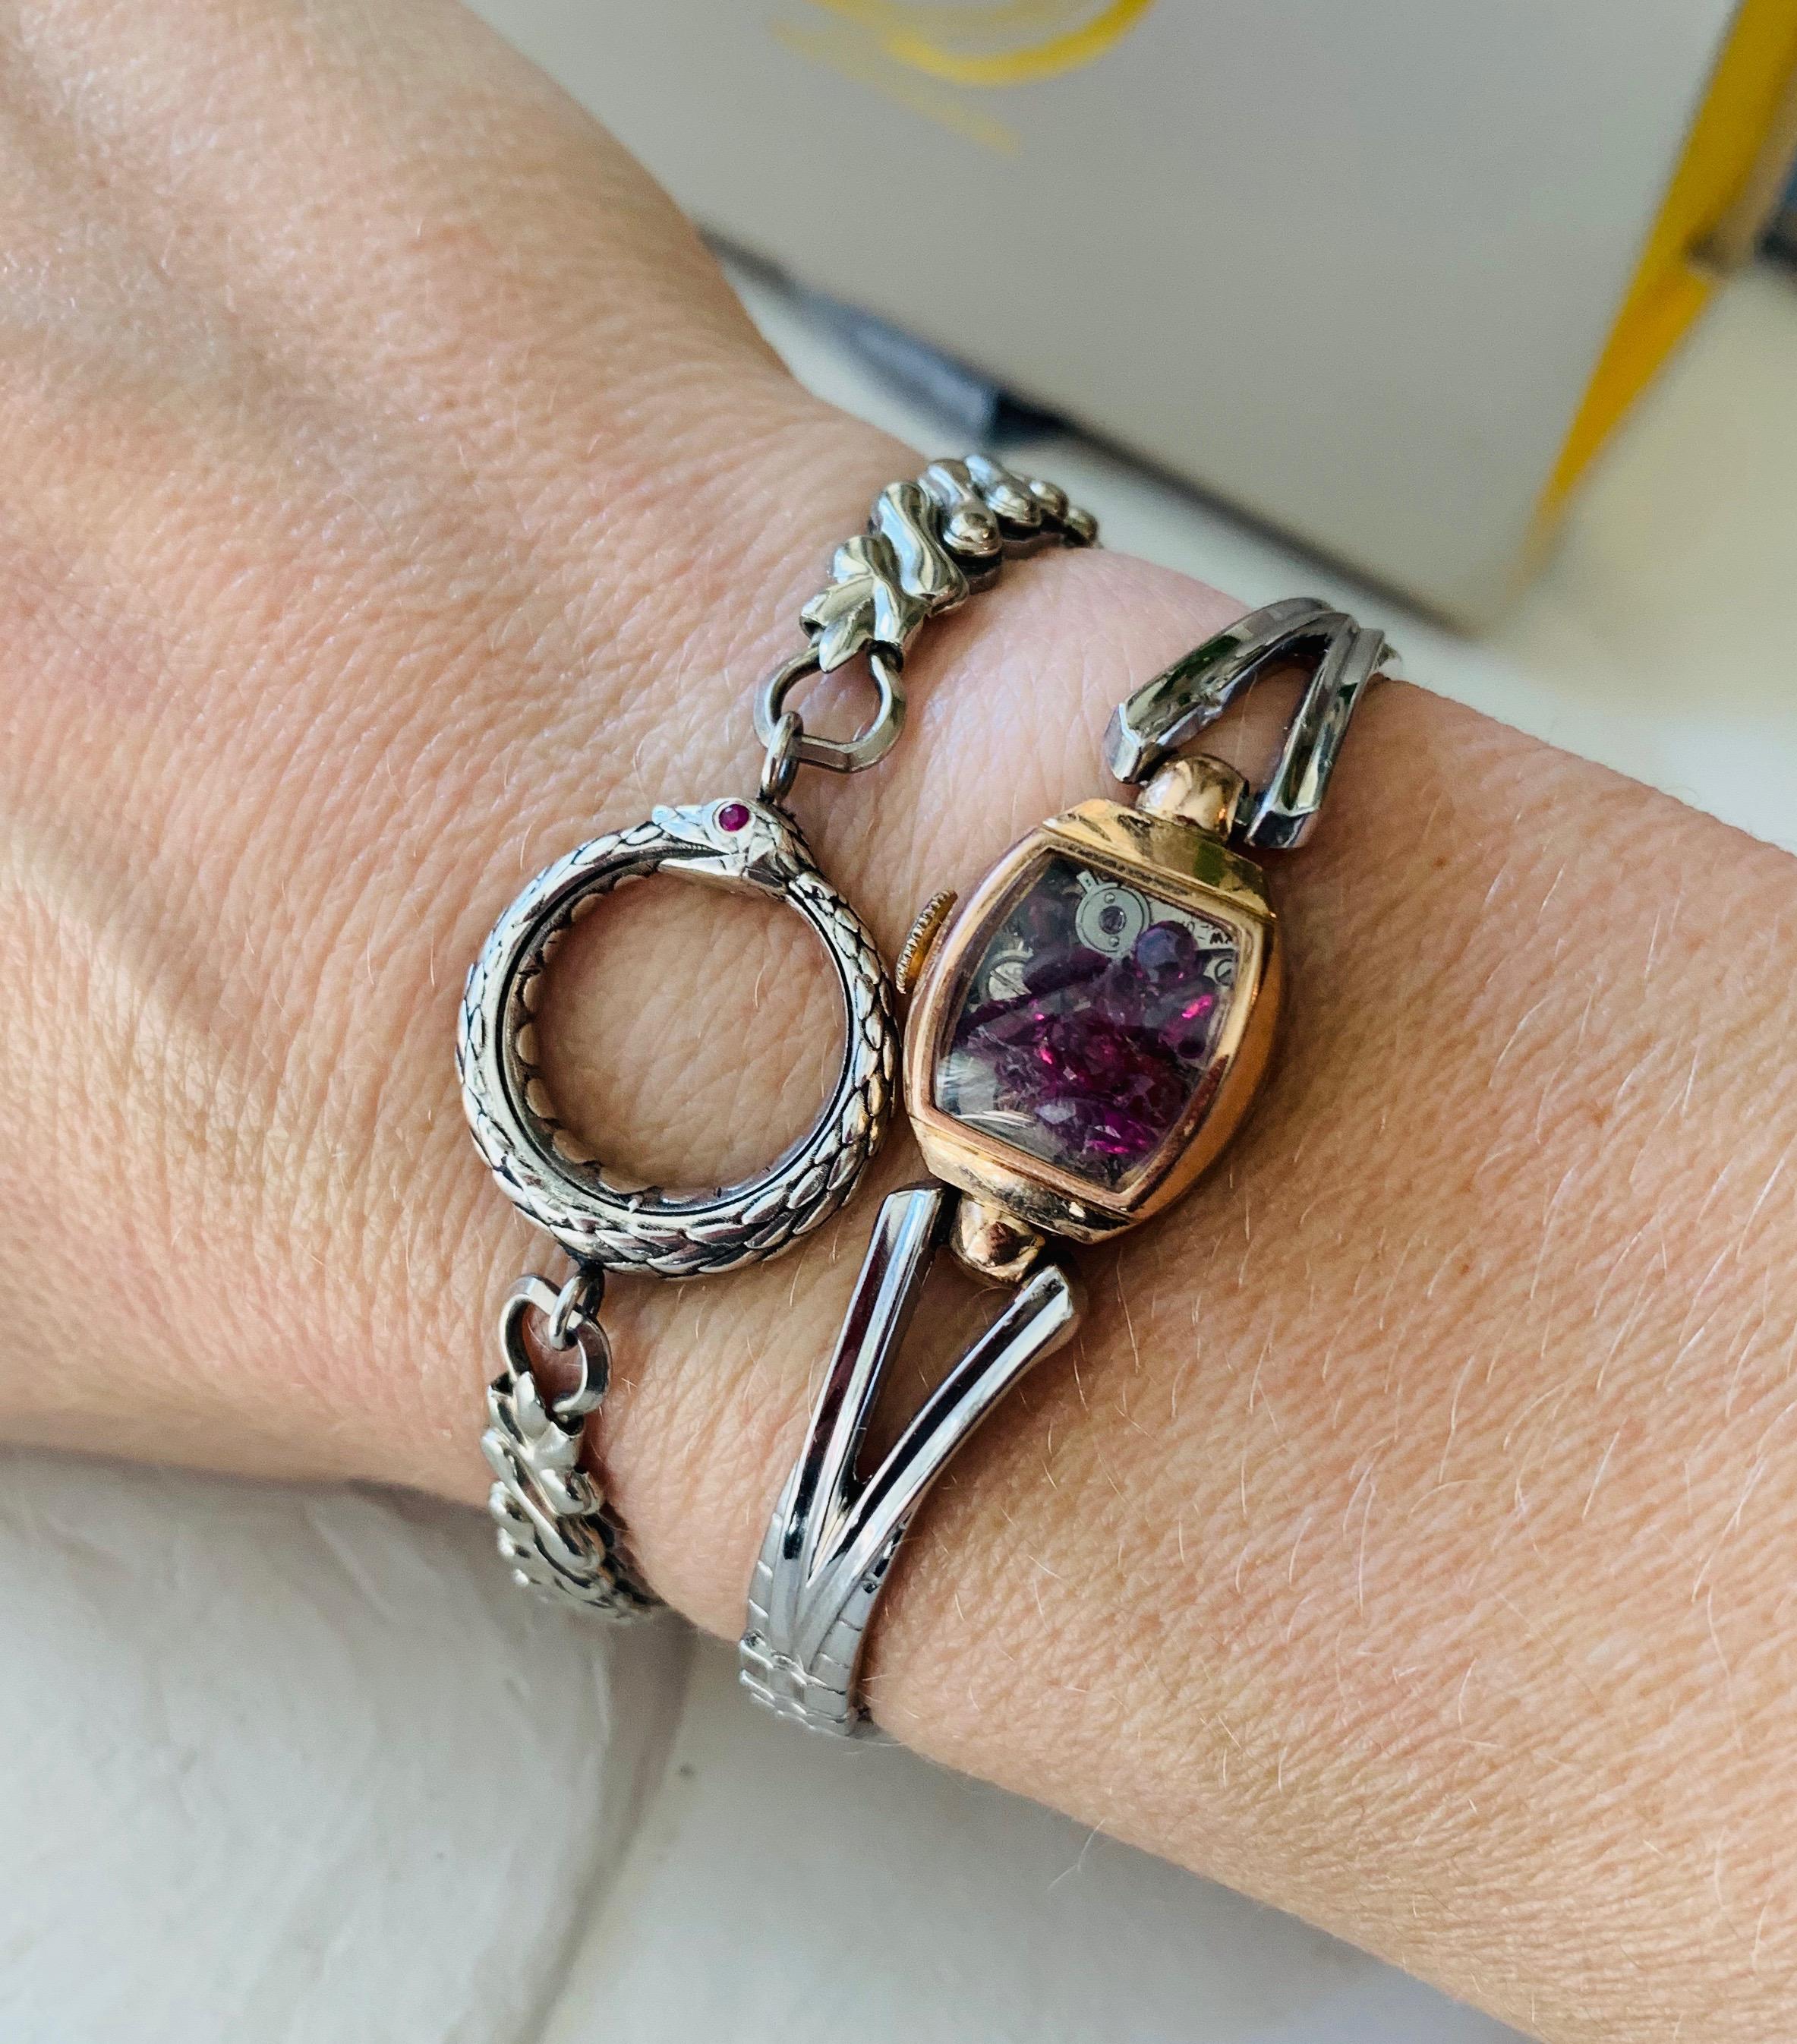 The Fairydust band is a non-functioning antique watch  a symbol, a talisman,
to hold the intention of staying present, neither dwelling in
the past nor looking toward the future. The fairydust inside this particular band is 2 carats of Vintage